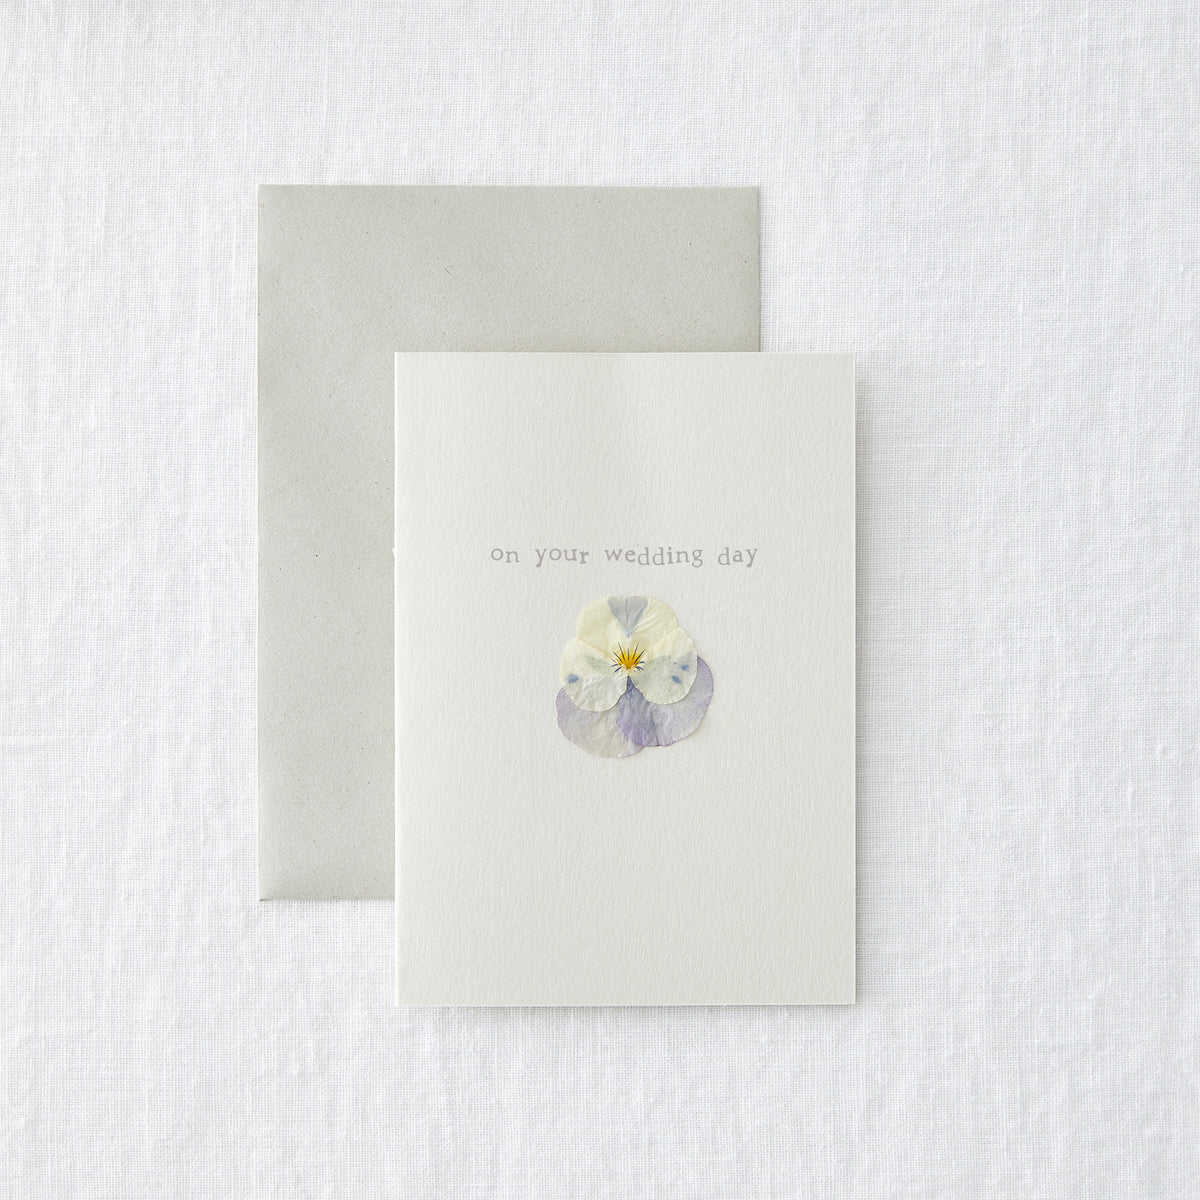 On Your Wedding Day Pressed Pansy Card by penny black